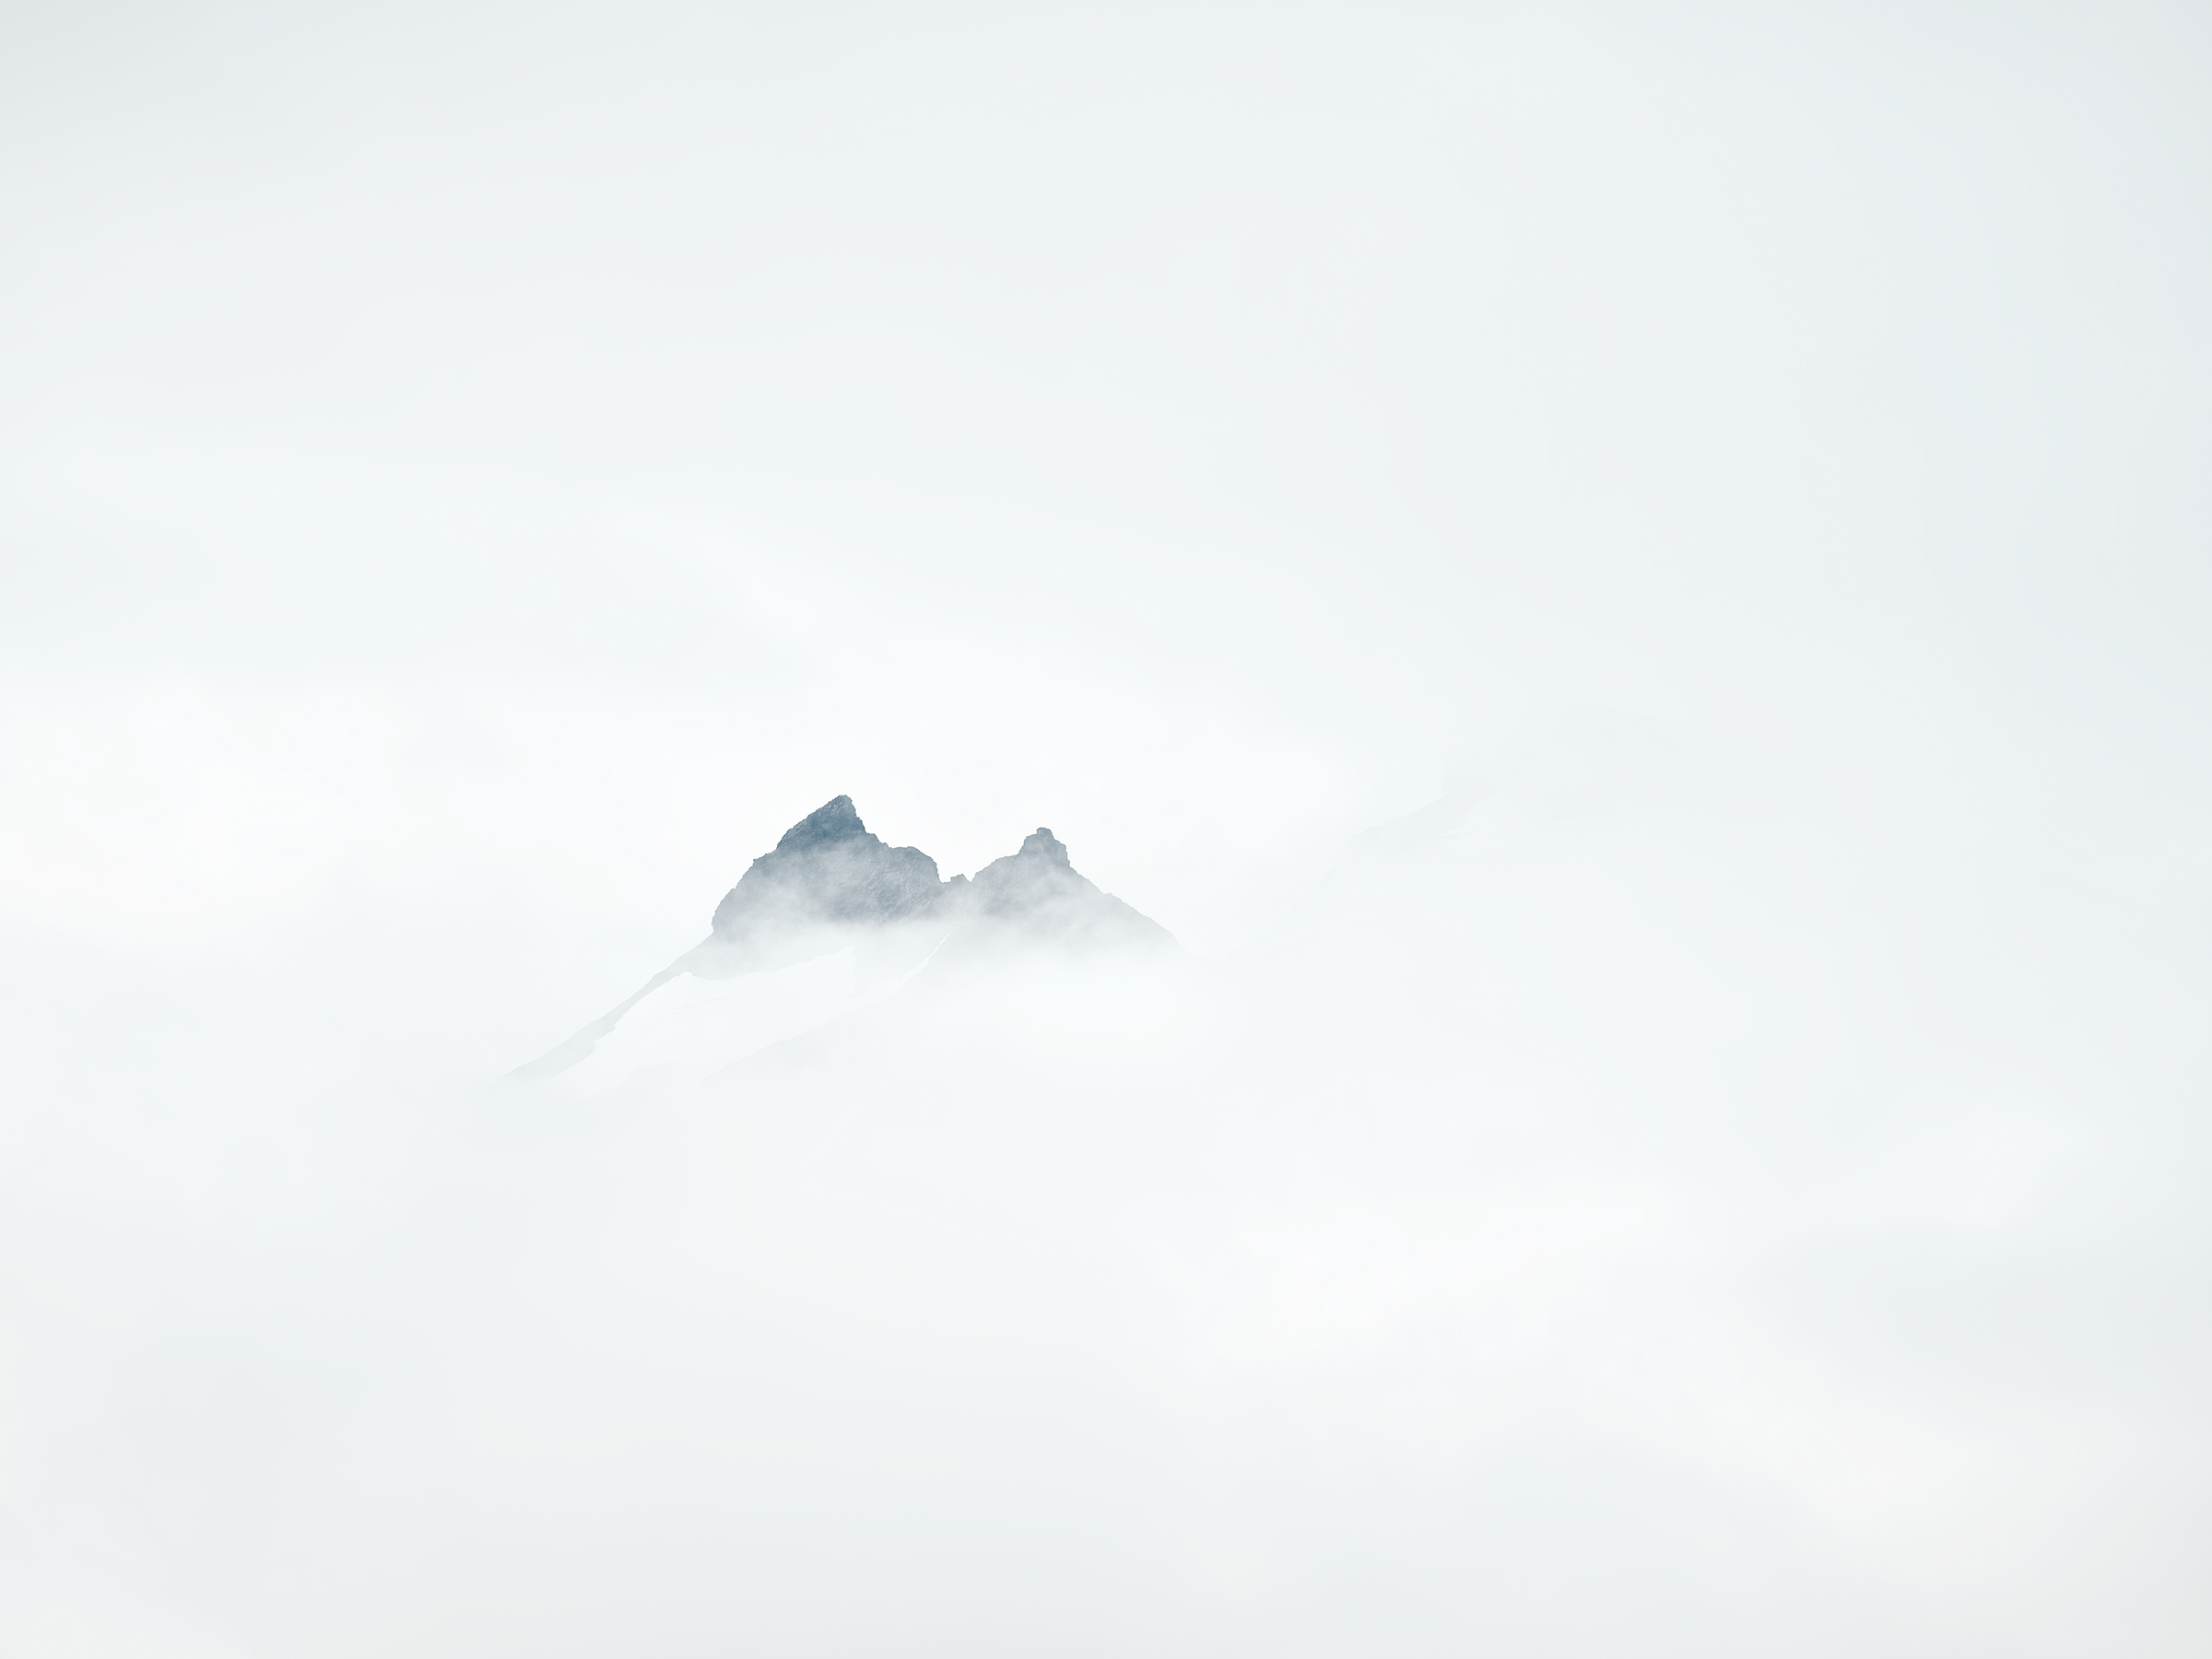 The mountains of Ähpar barely visible through low clouds.